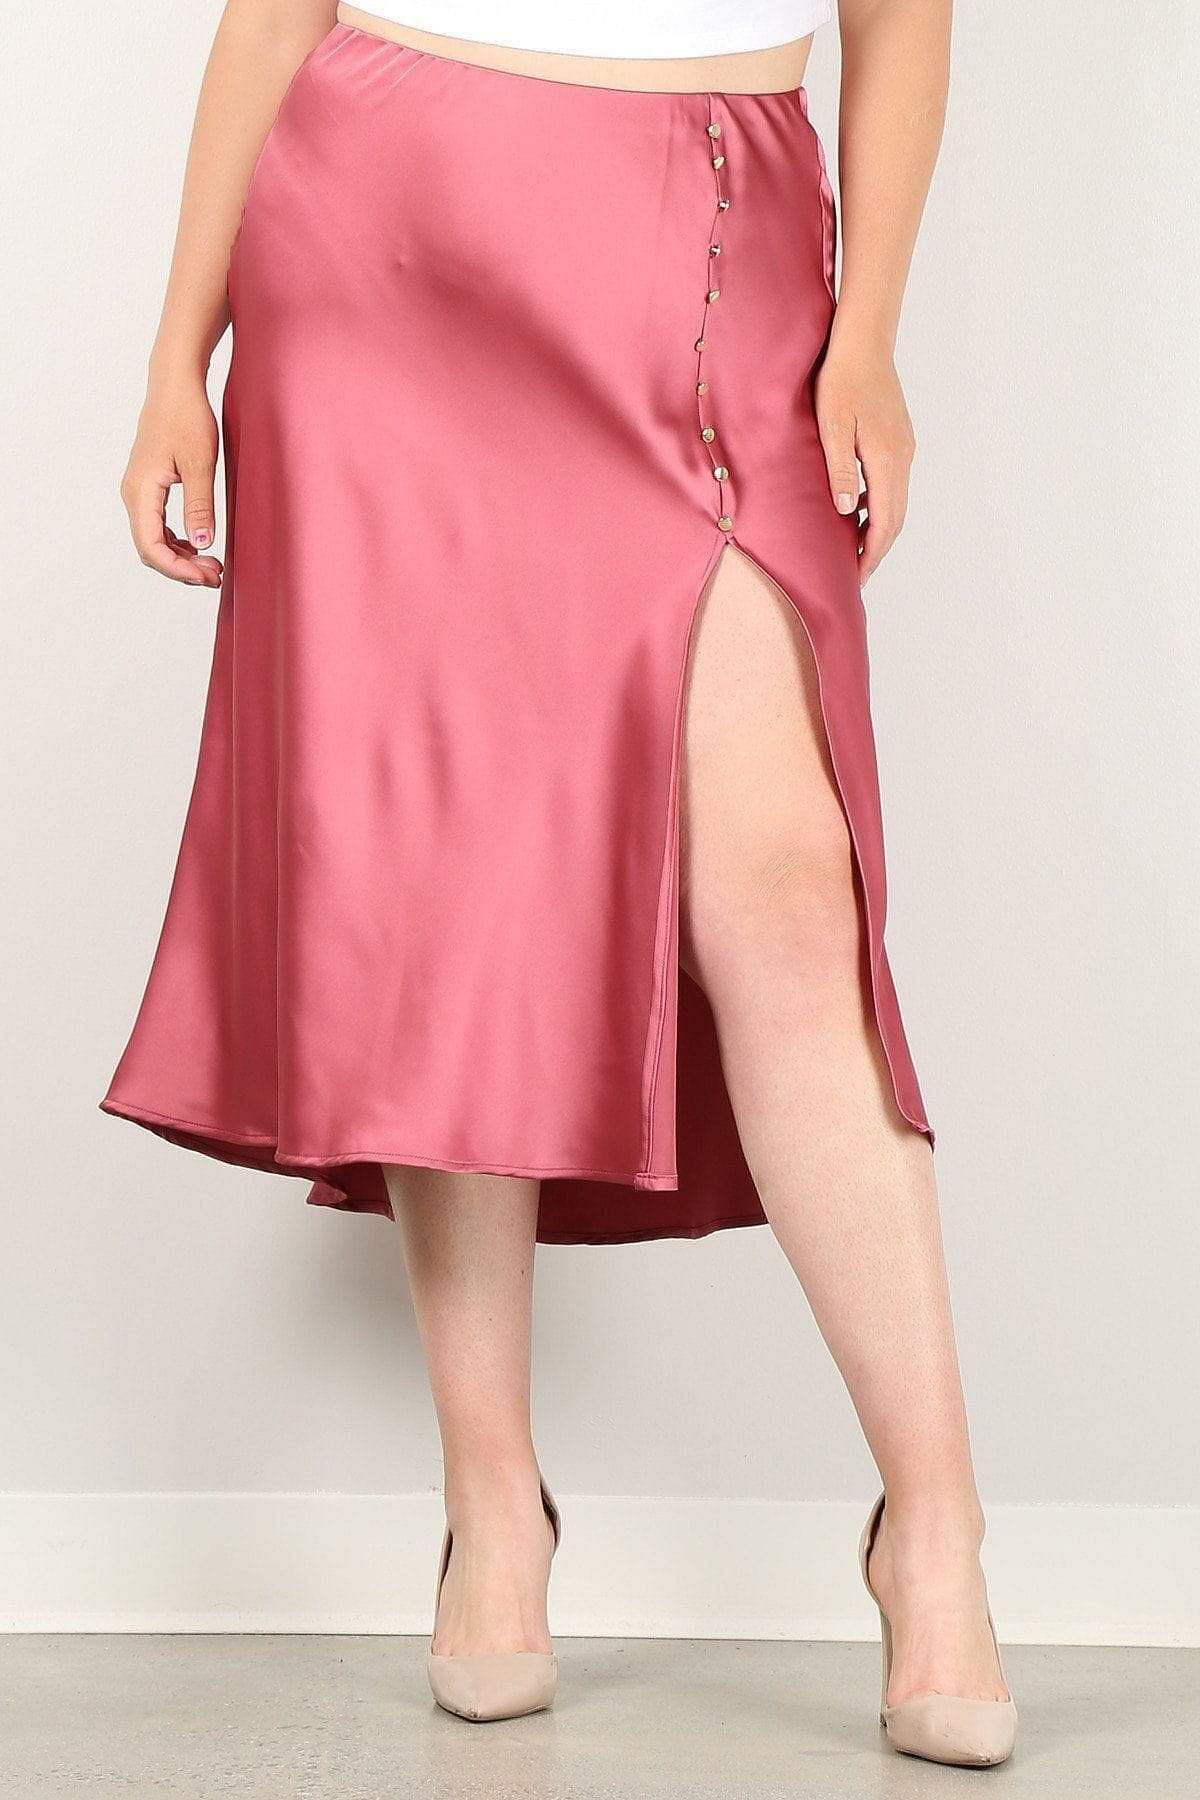 Rose Plus Size Midi Skirt With Side Slit - Shopping Therapy 1XL skirt